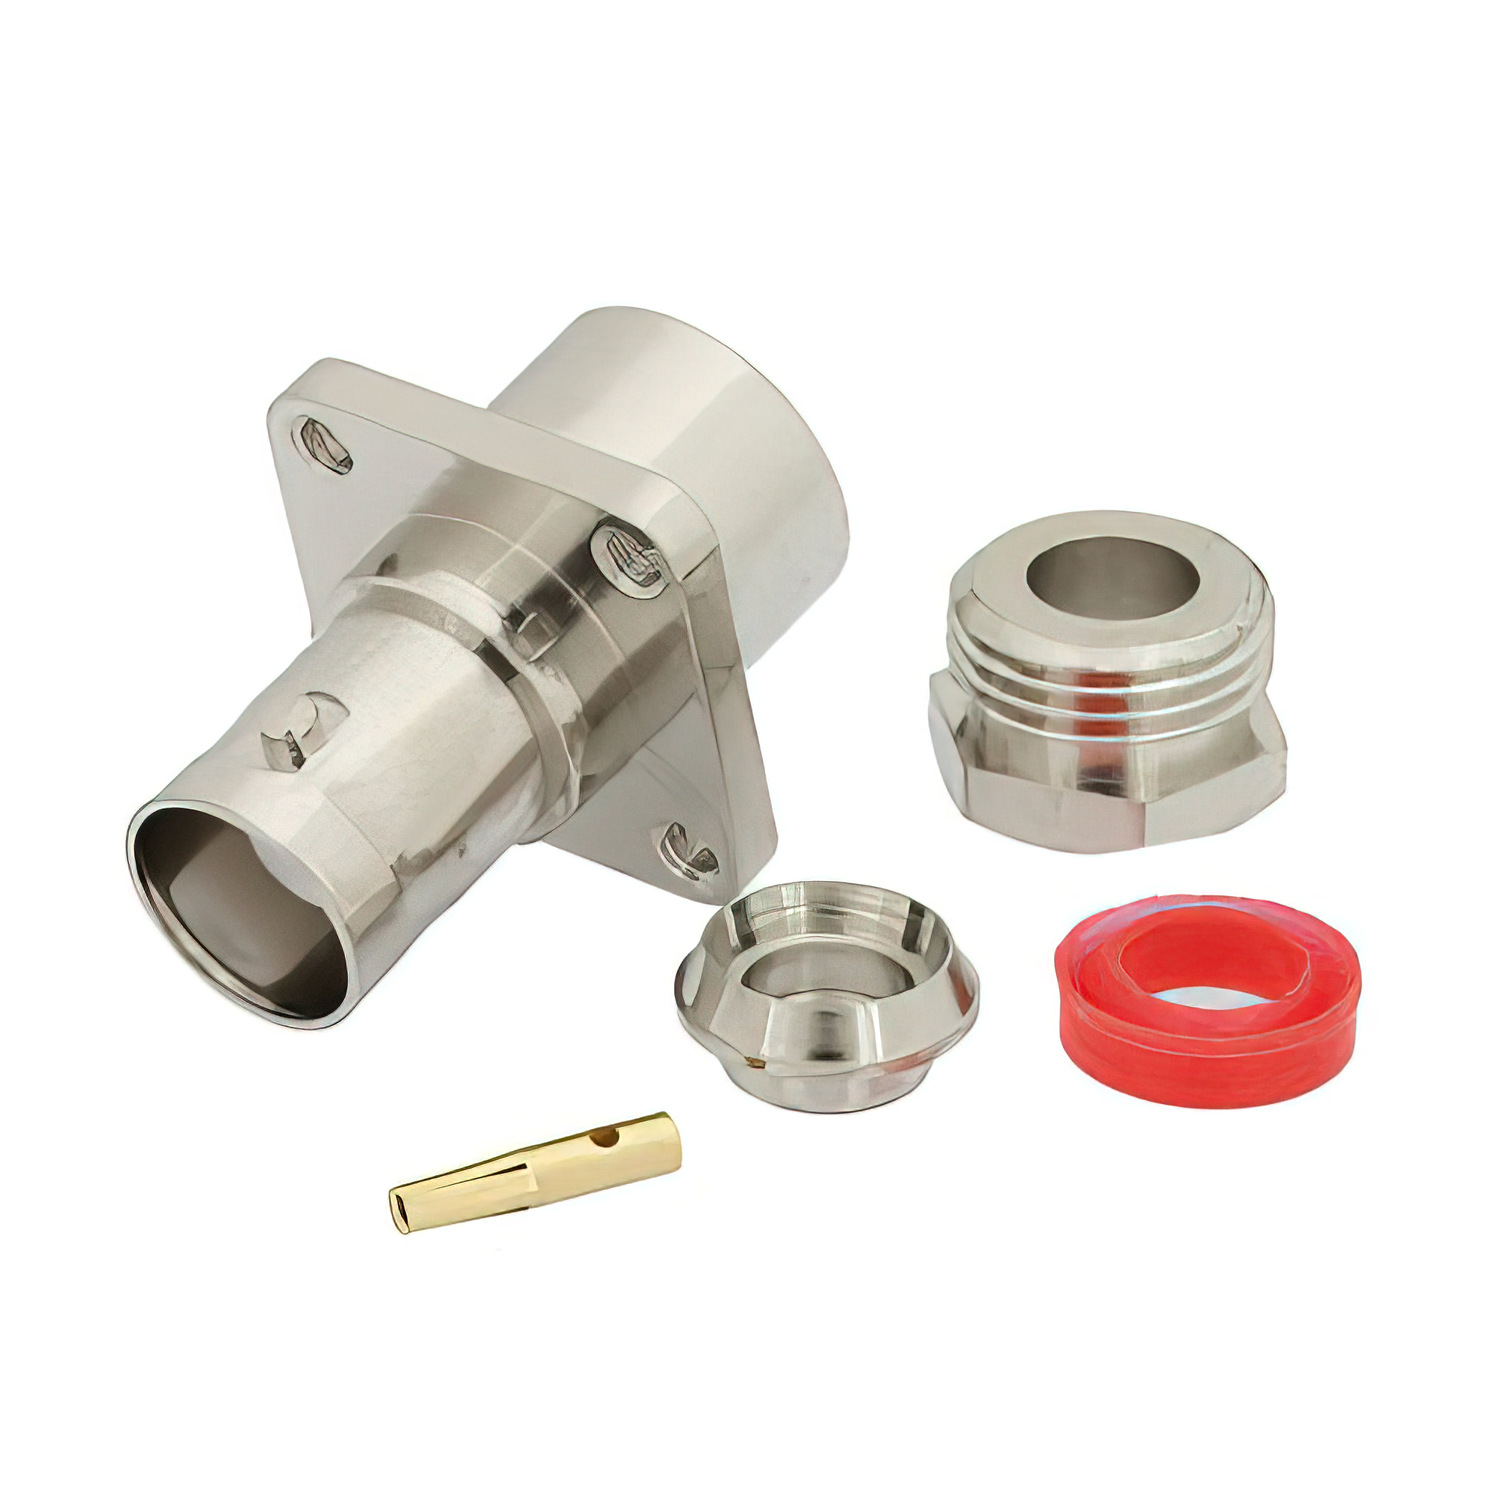 BNC Female Connector Clip Weld 4 Hole Flange1